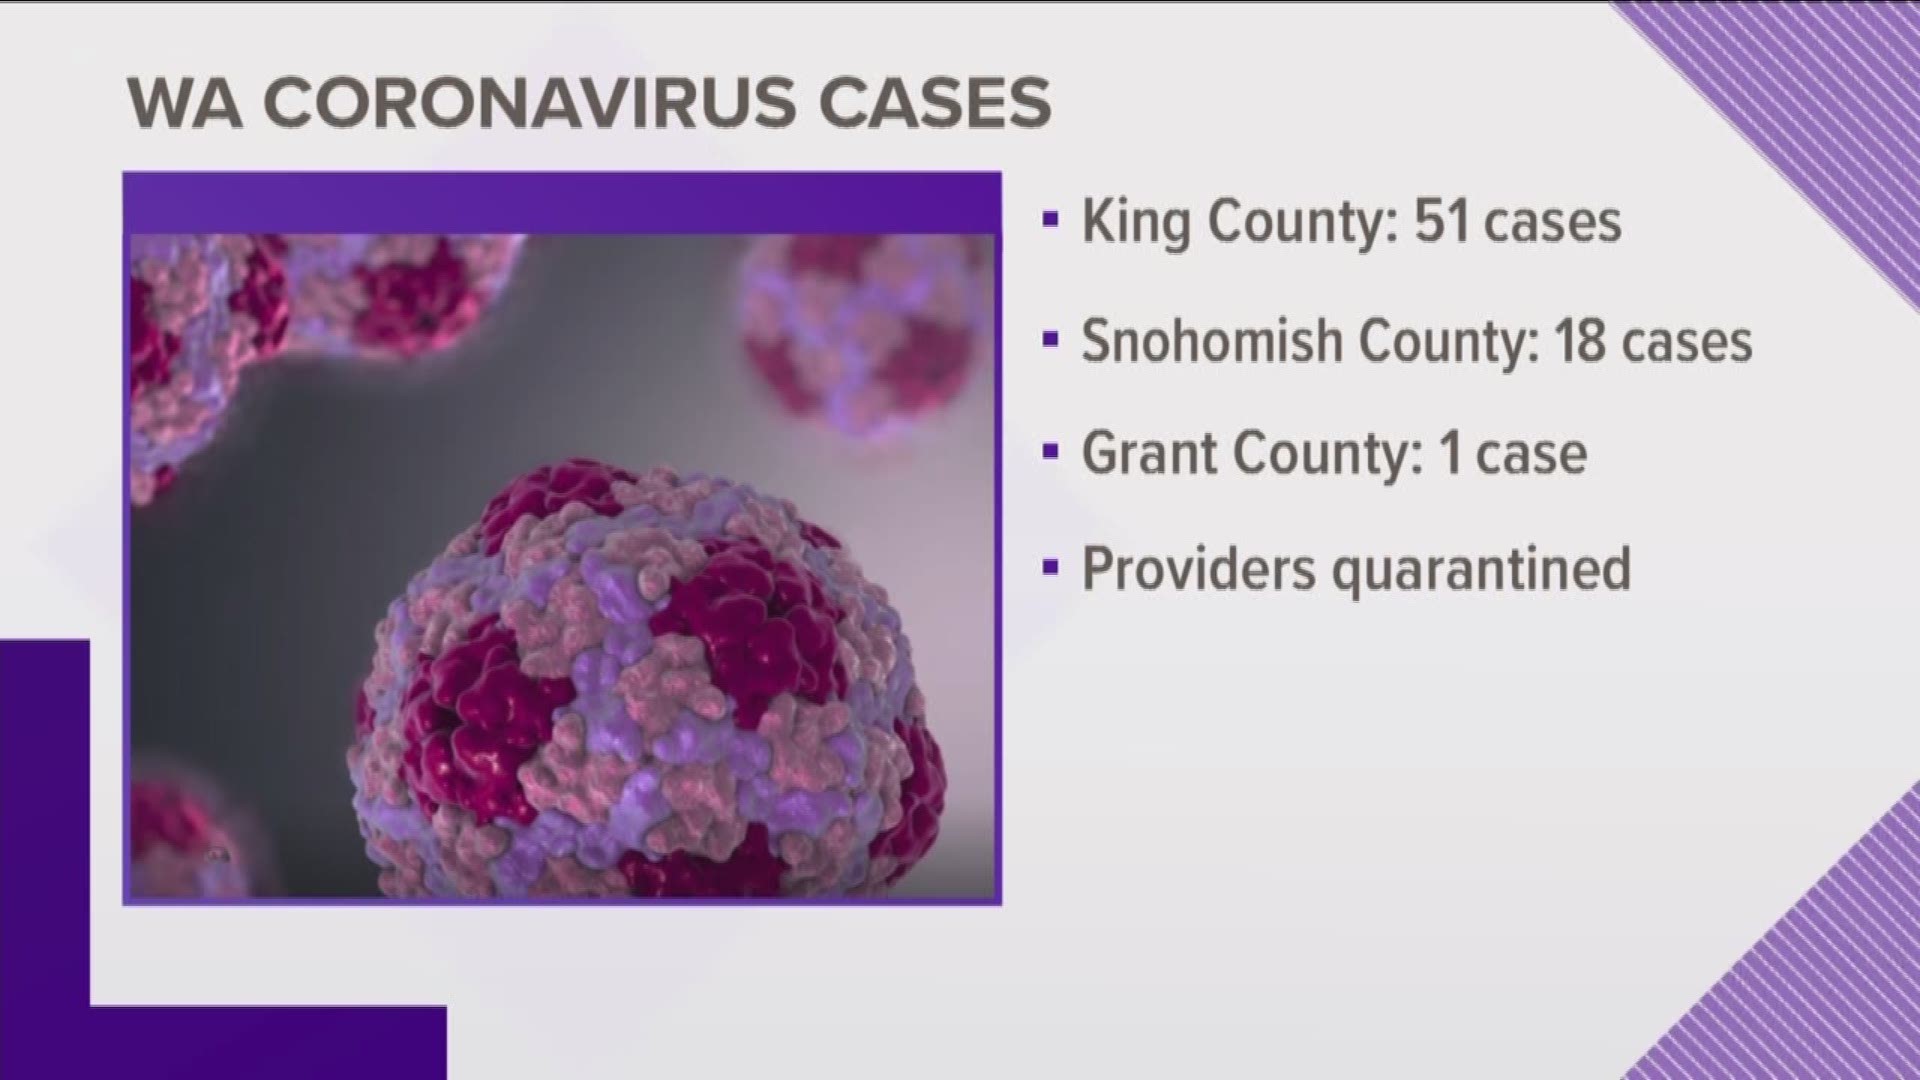 As of March 5, 11 people have died and 70 cases of coronavirus have been confirmed in Washington.